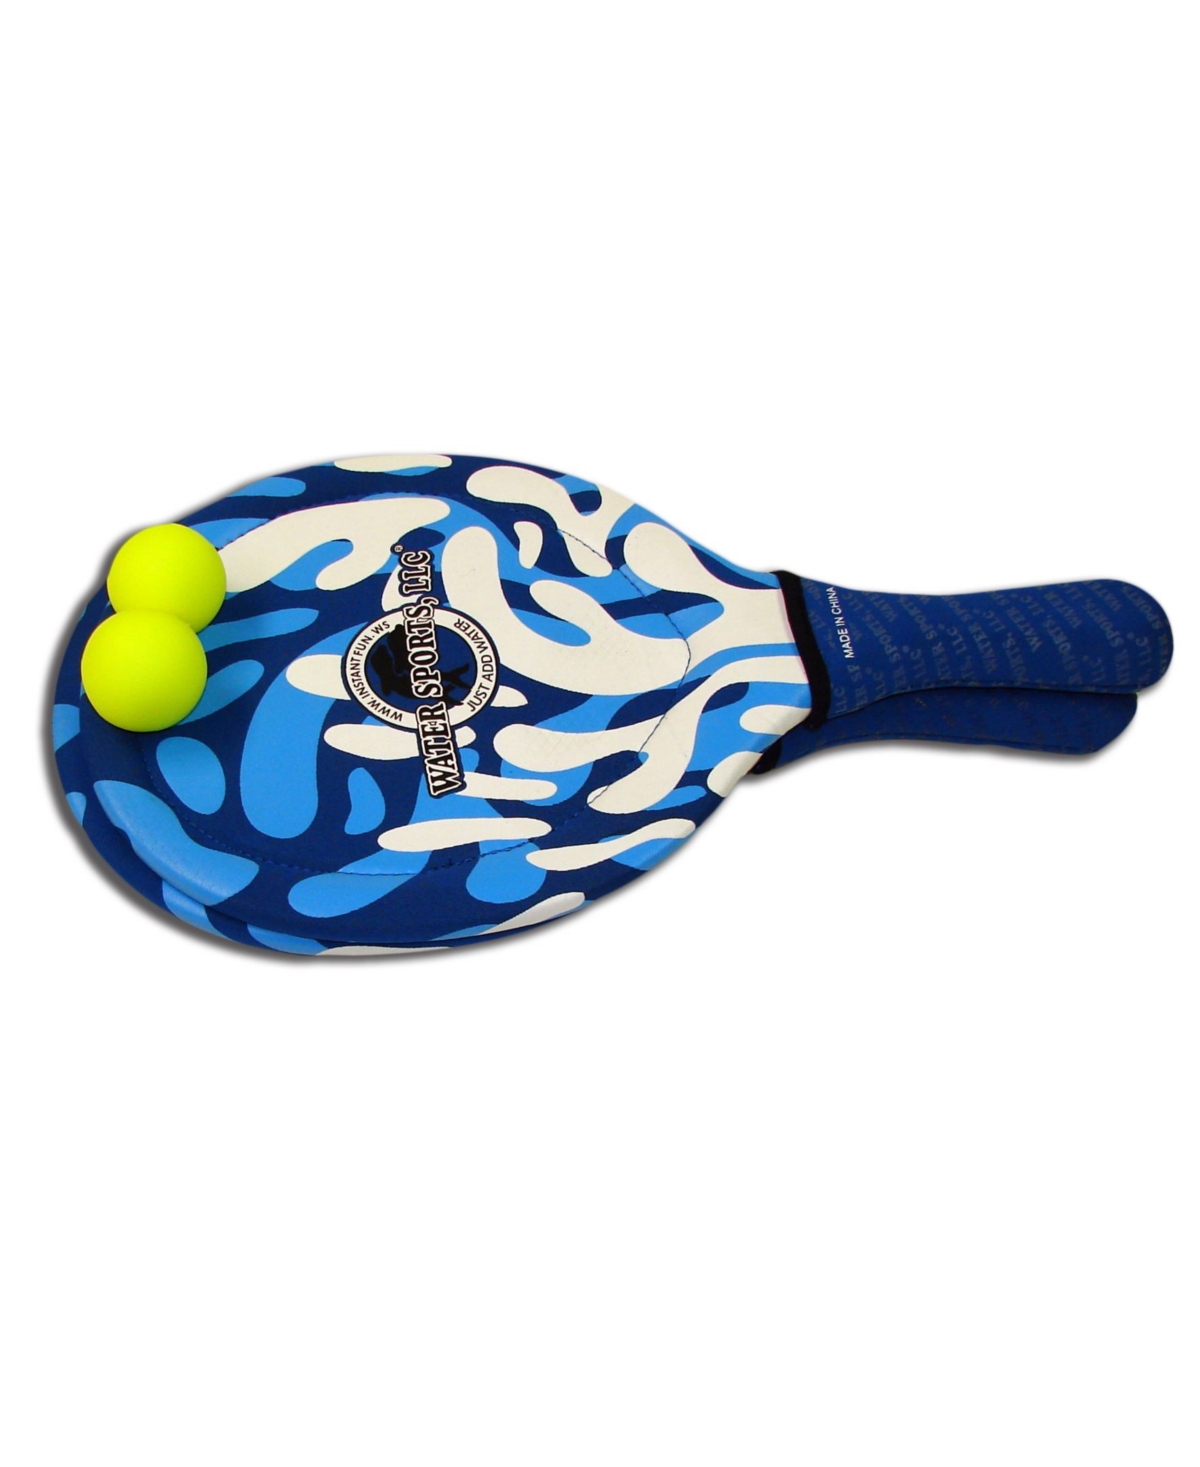 Stream Machine Pool And Beach Toy Itzamasher Challenging Paddle Game In Blue